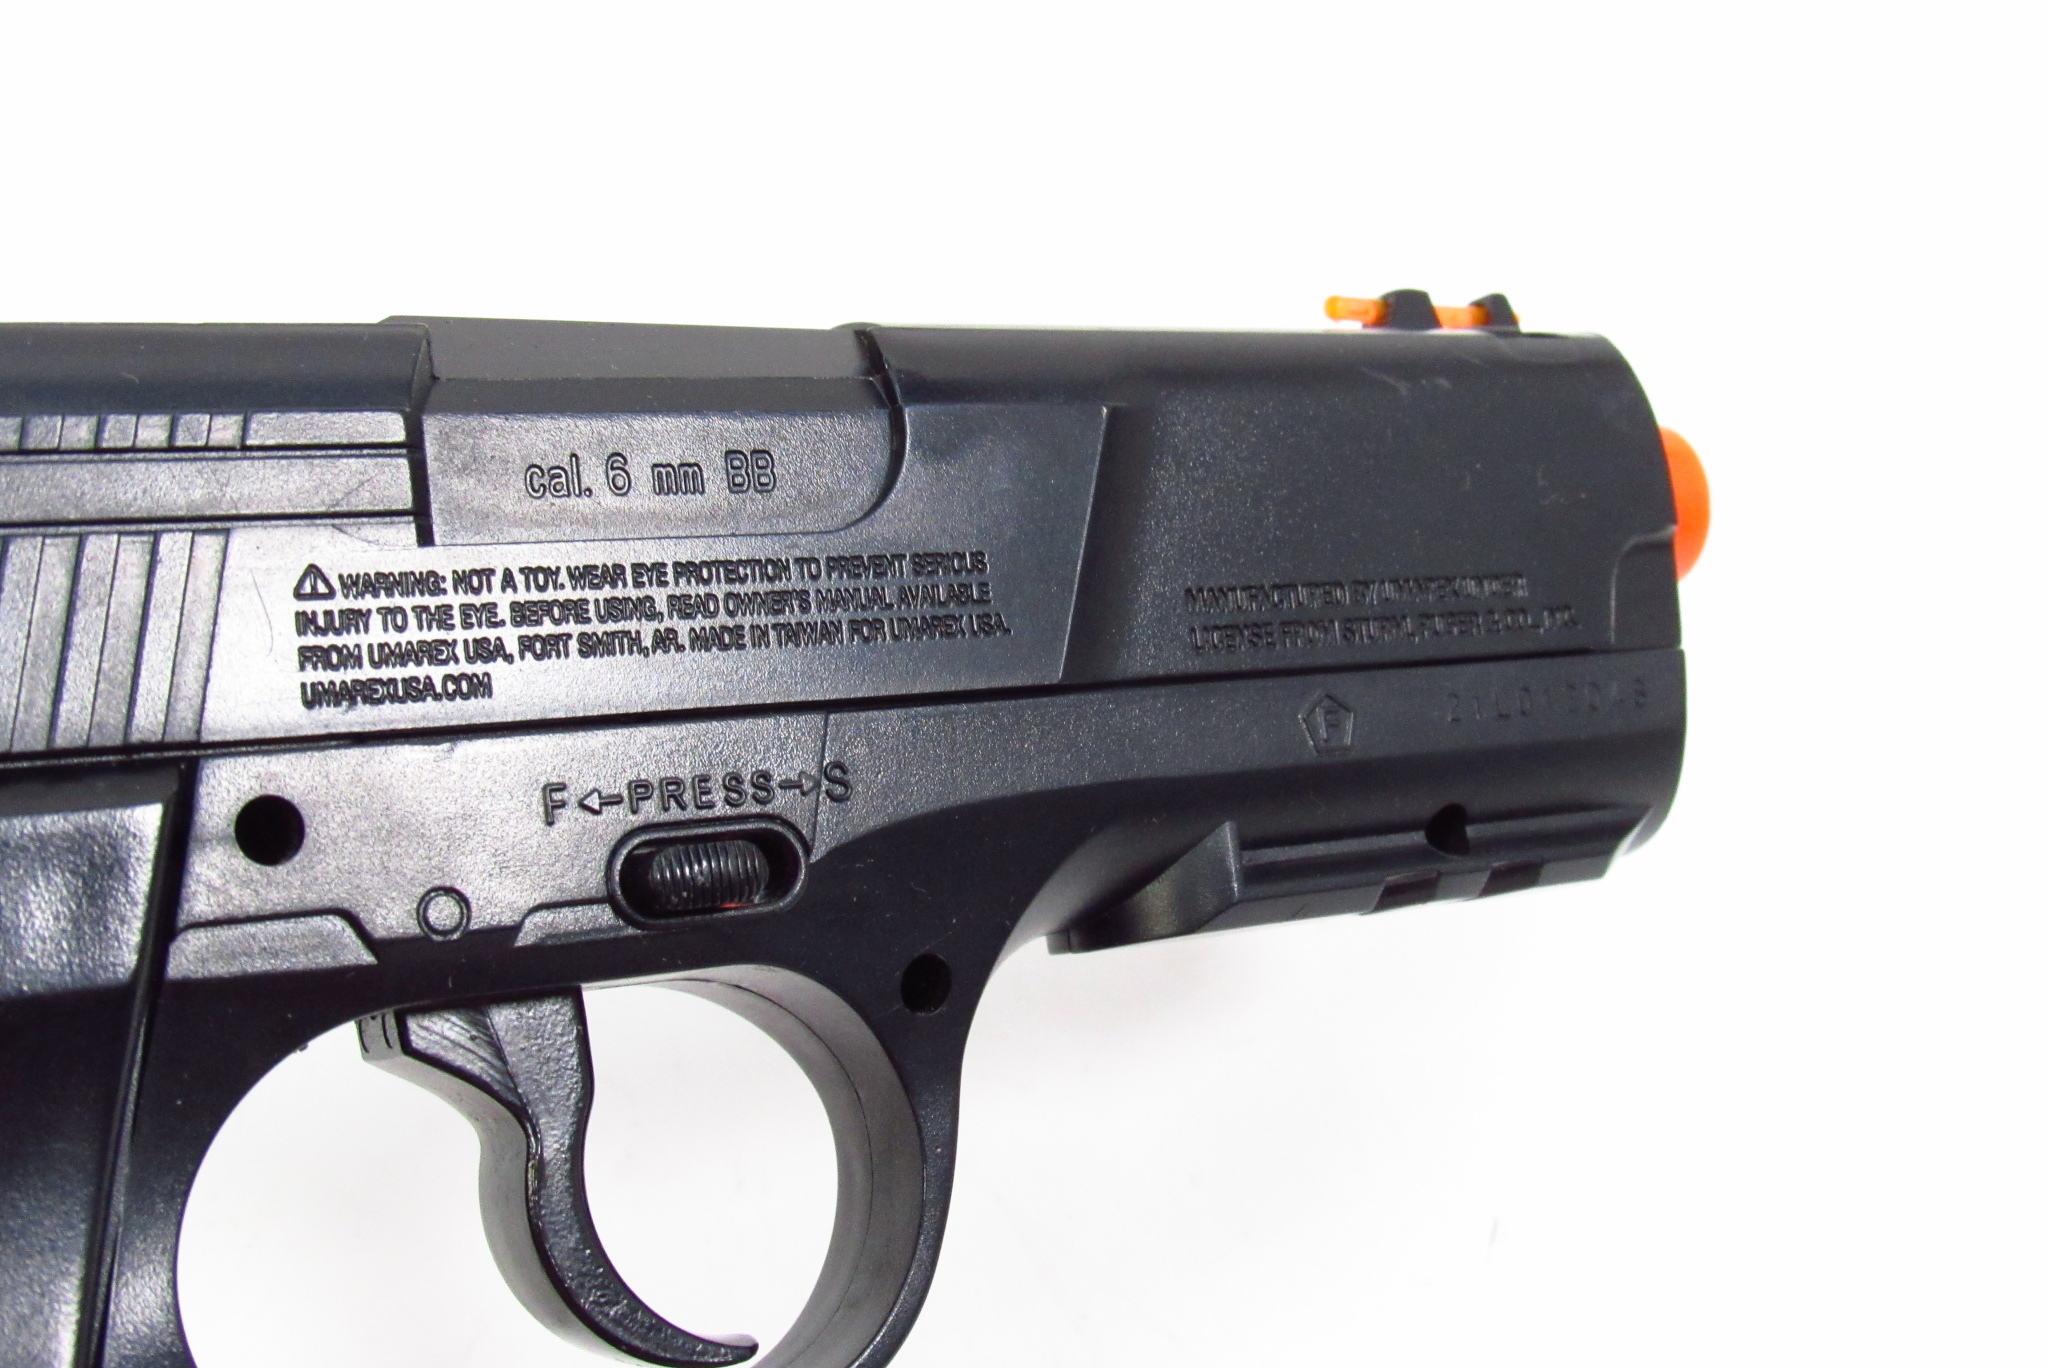  Elite Force Ruger P345 PR CO2 Powered 6mm BB Pistol Airsoft  Gun : Sports & Outdoors